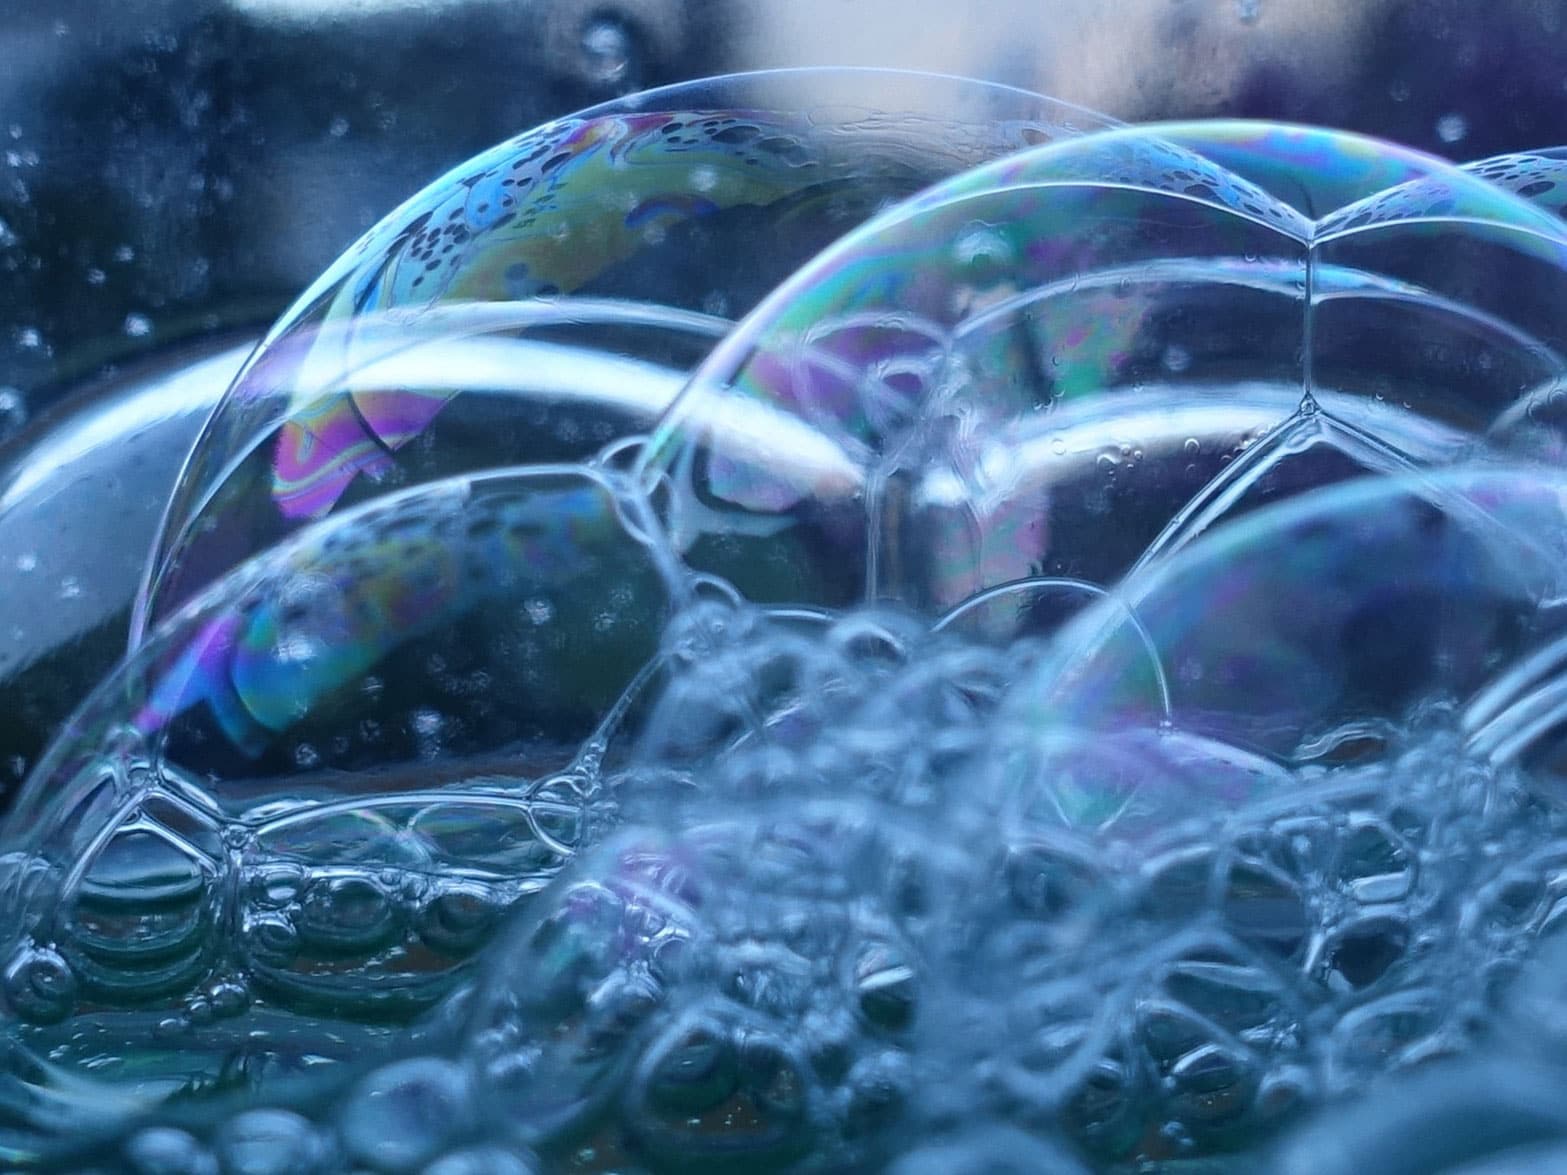 The physics of bubble evolution